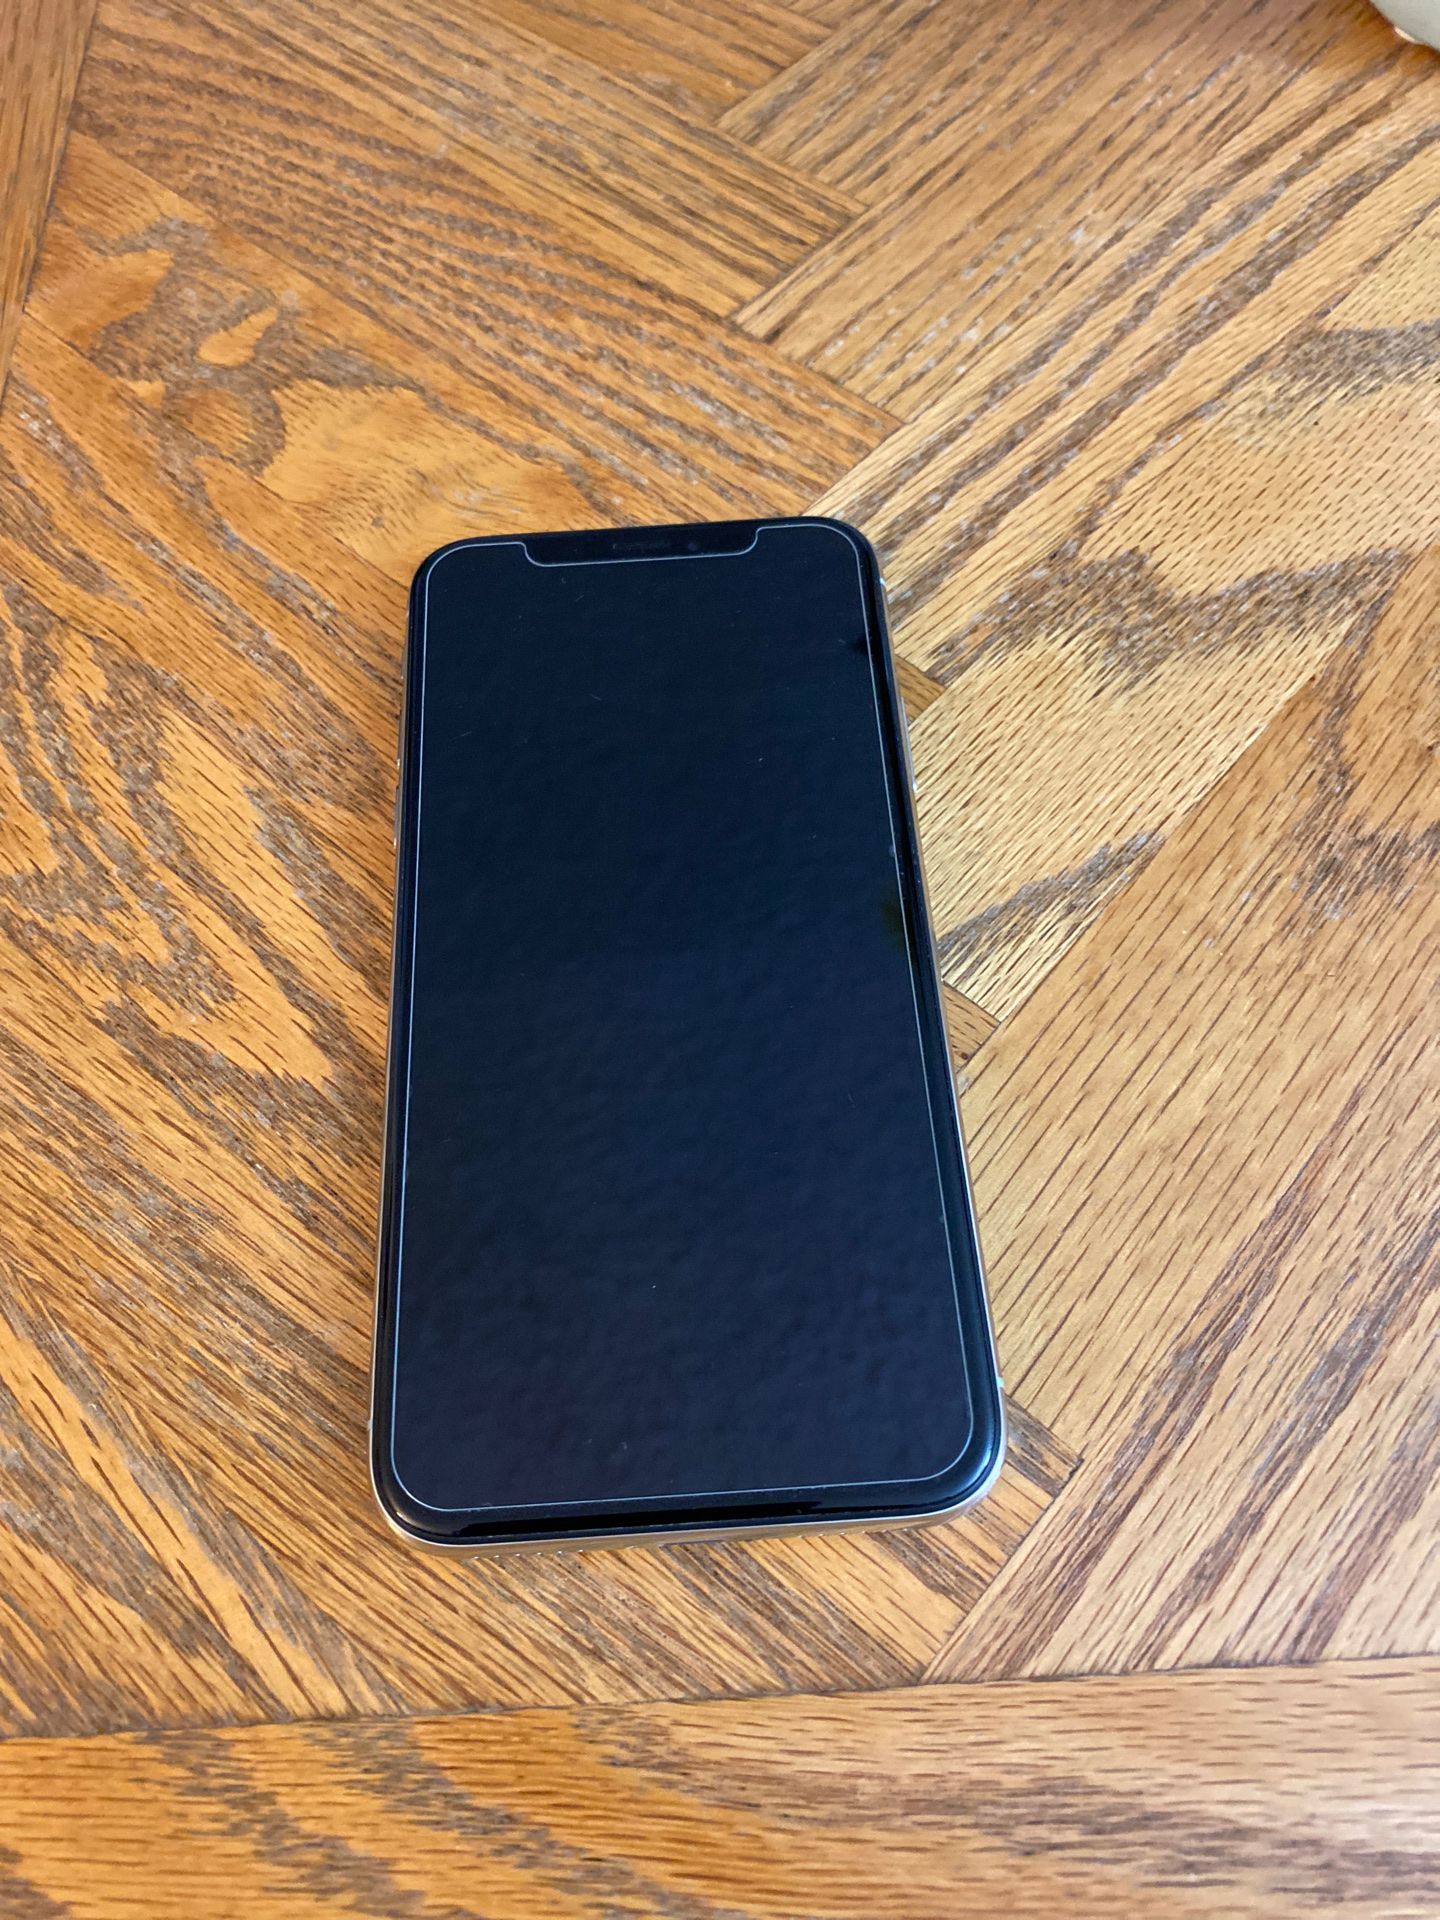 iPhone X 256 gb unlocked excellent condition work with any carrier